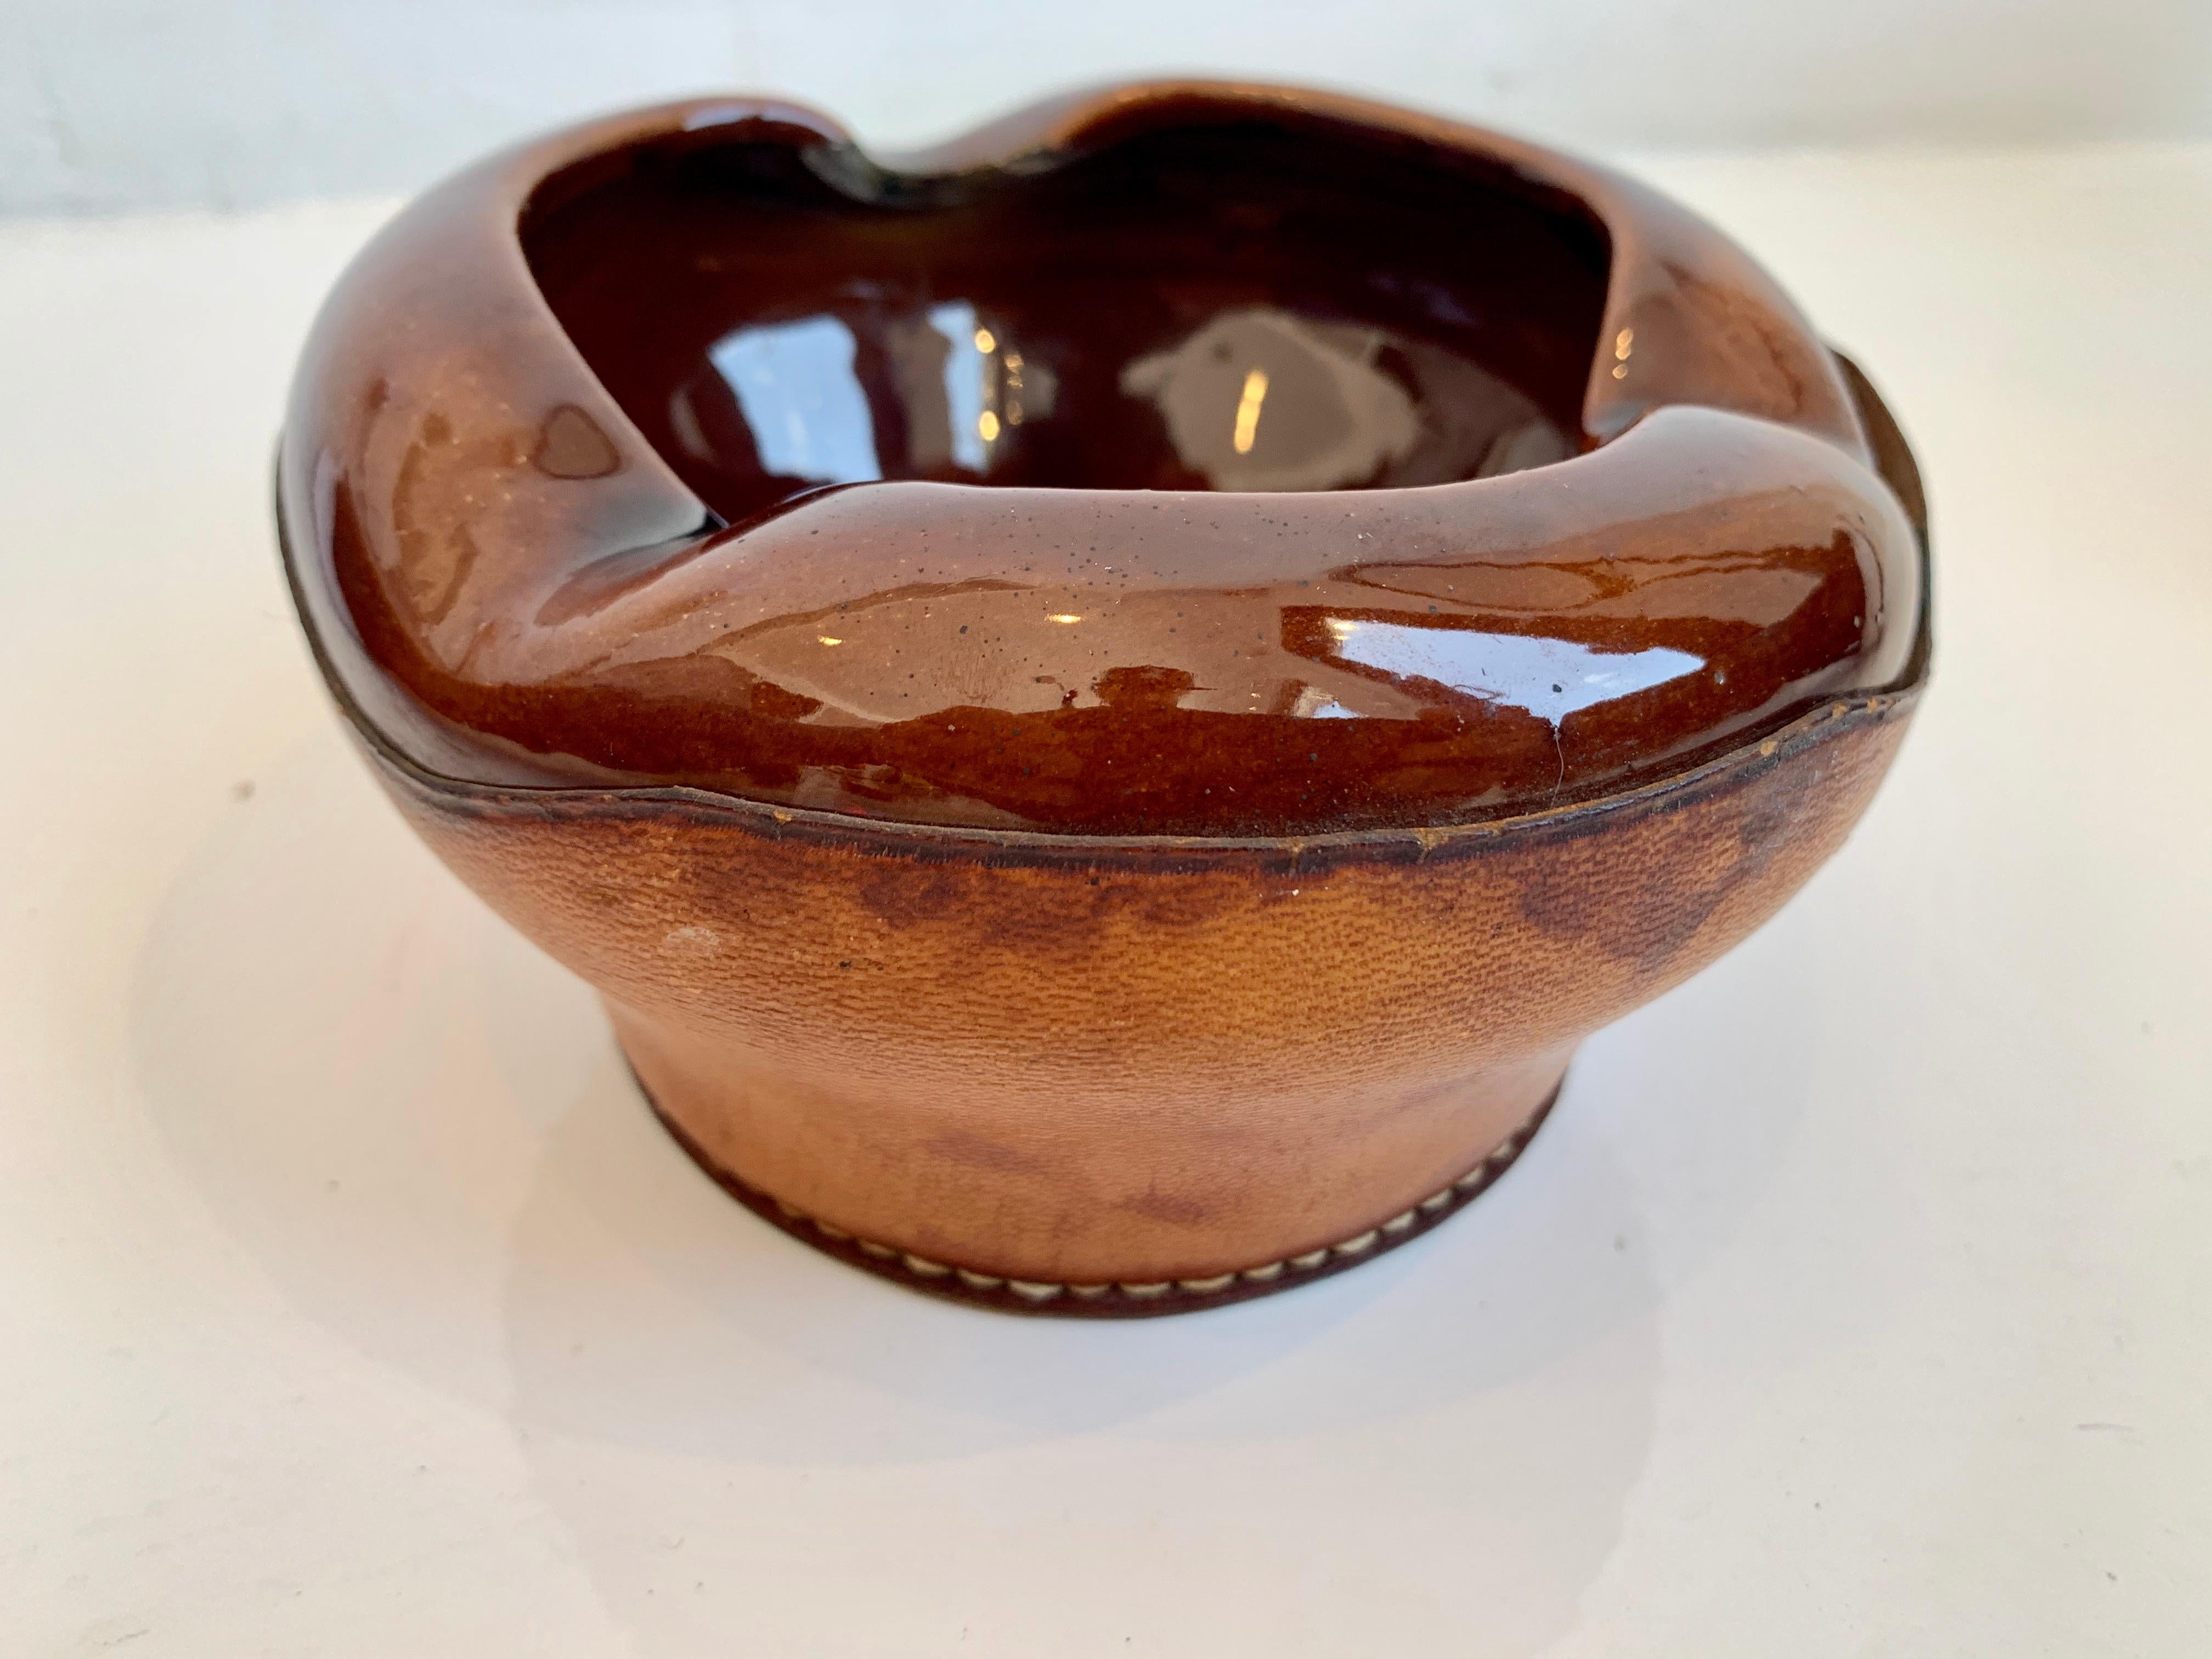 Saddle Leather and Ceramic Catchall / Ashtray by Longchamp In Good Condition For Sale In Los Angeles, CA